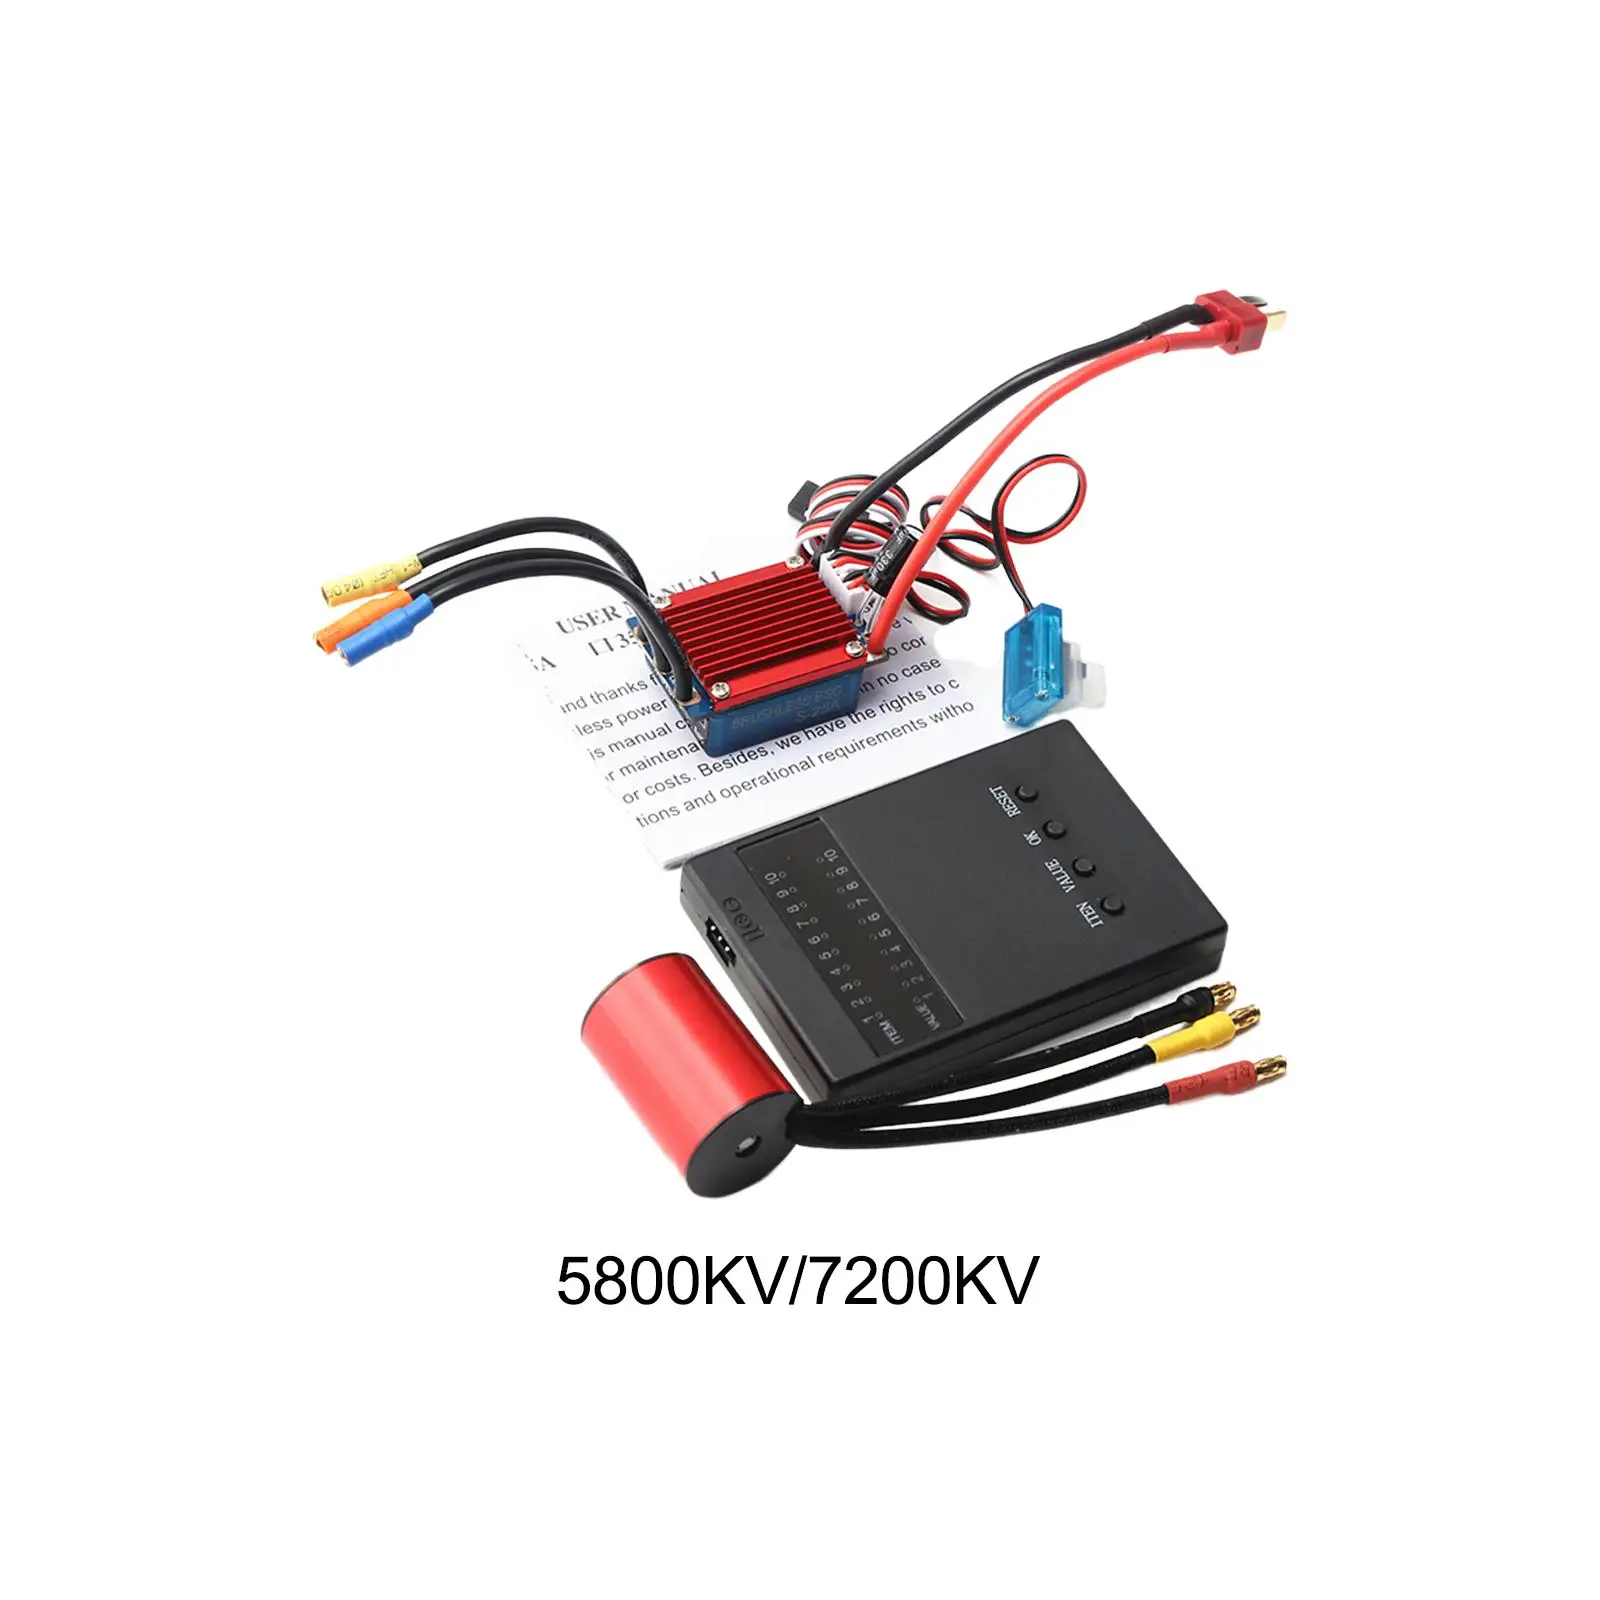 

RC 2430 Motor ESC Combo 25A Brushless ESC Brushless RC Motor Accessories for 1/12 1:14 RC Car Update Parts Accessoies Replaces